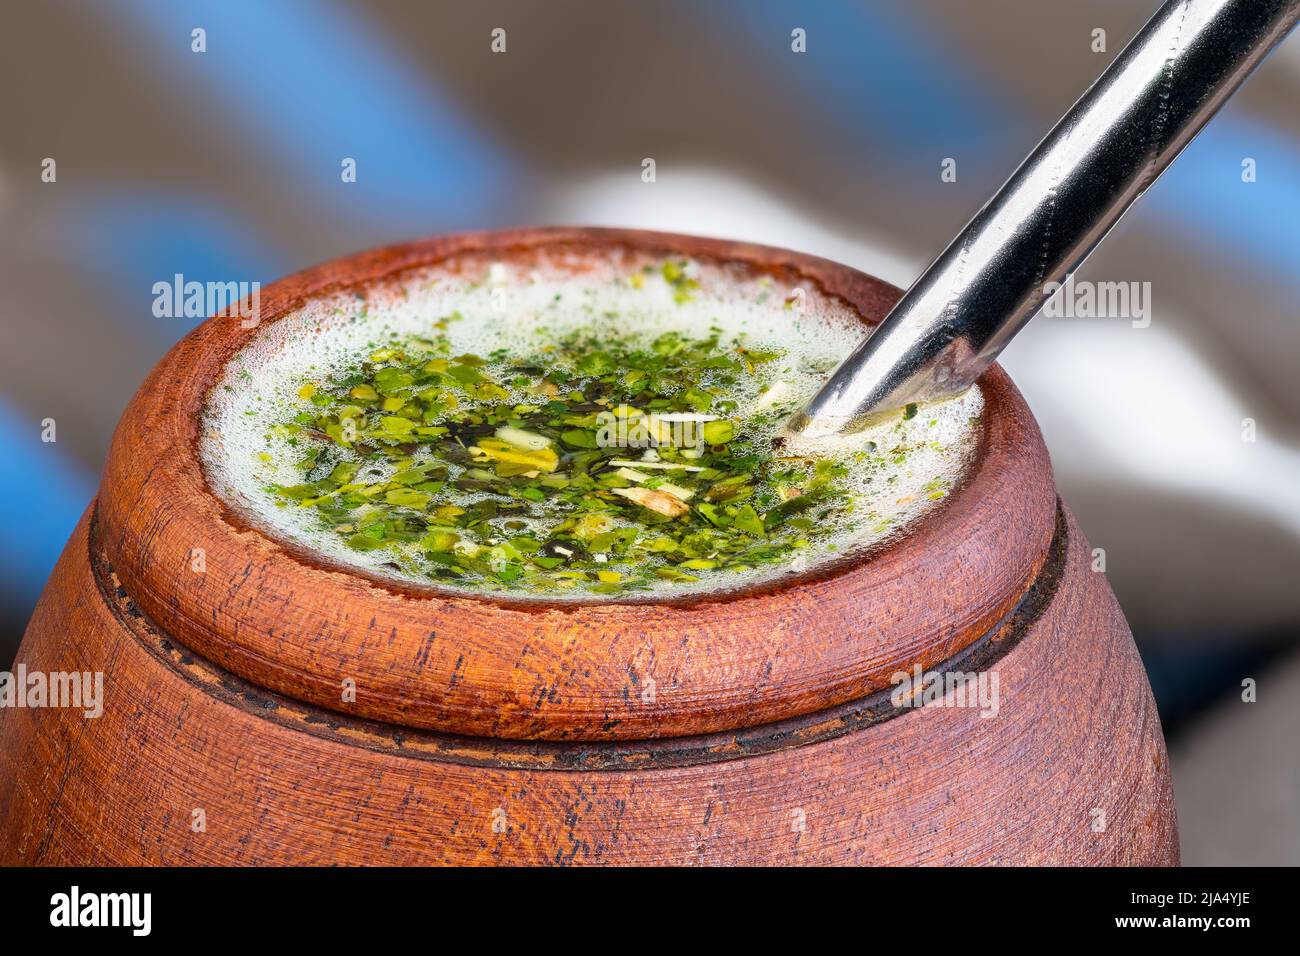 Wood cup of hot yerba mate with metal bombilla straw detail. Dried green holly leaves and white froth in herbal tea. Traditional South American drink. Stock Photo